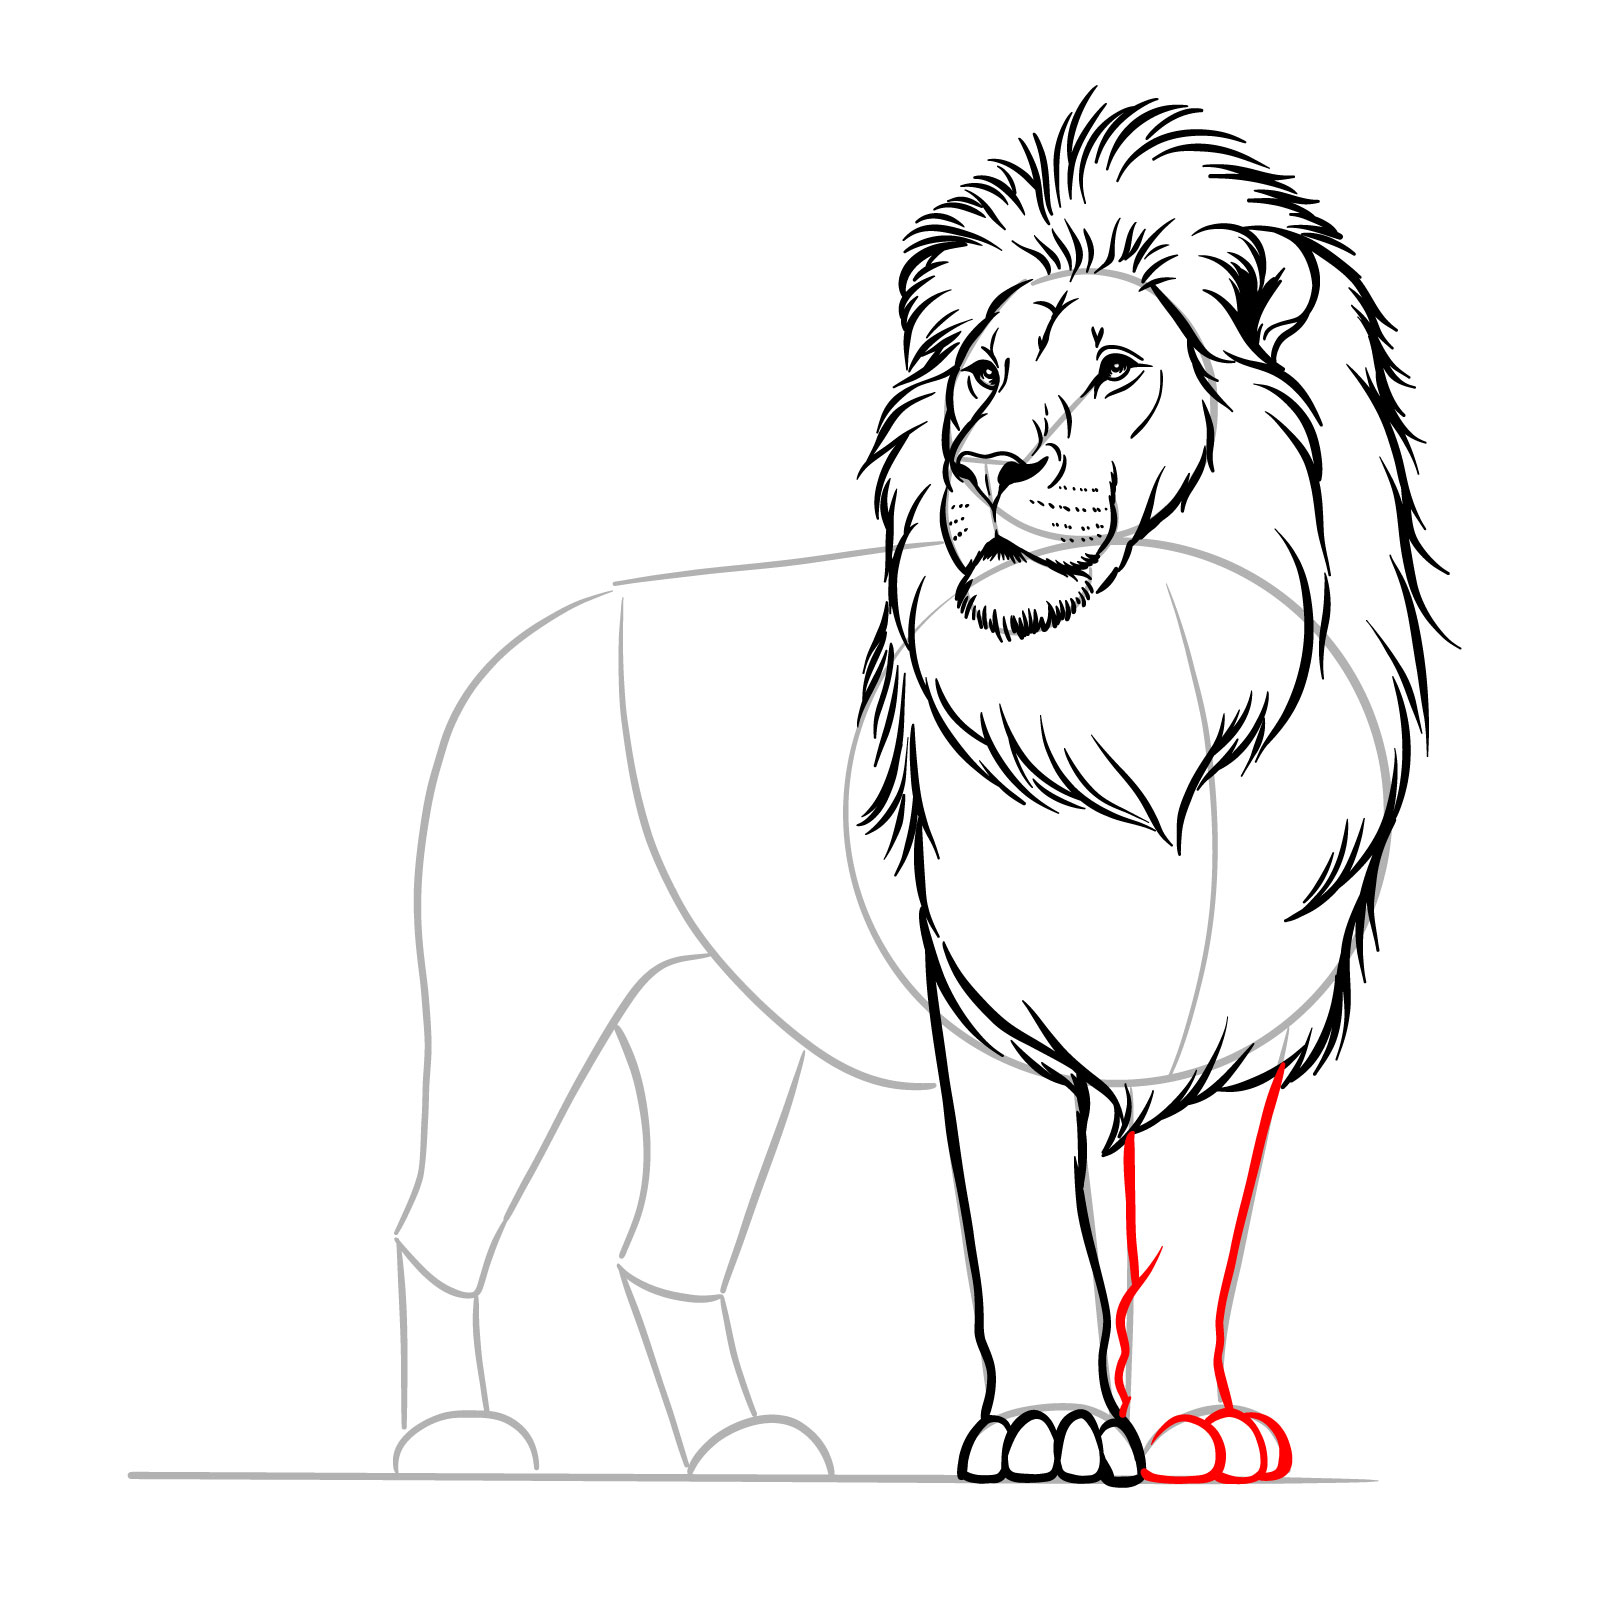 Instruction for drawing the lion's second front leg in a standing lion tutorial - step 10